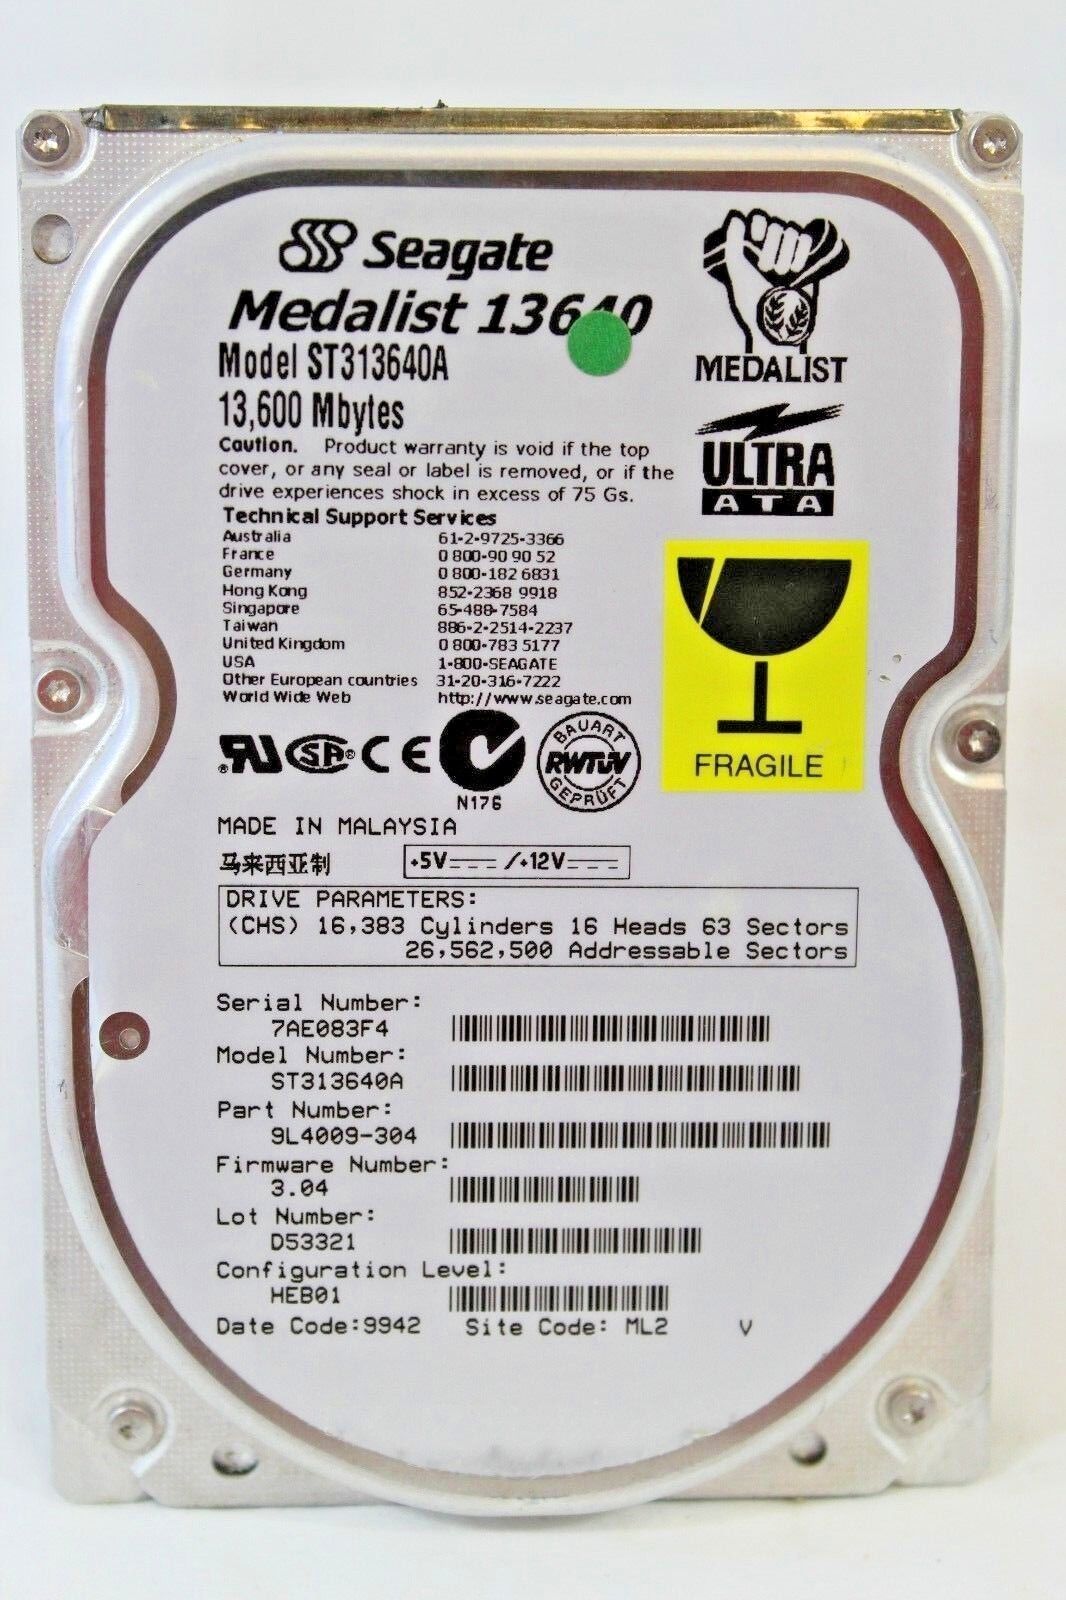 Seagate Model ST313640A Medalist 13600MB Tower Computer Hard Drive HDD TESTED